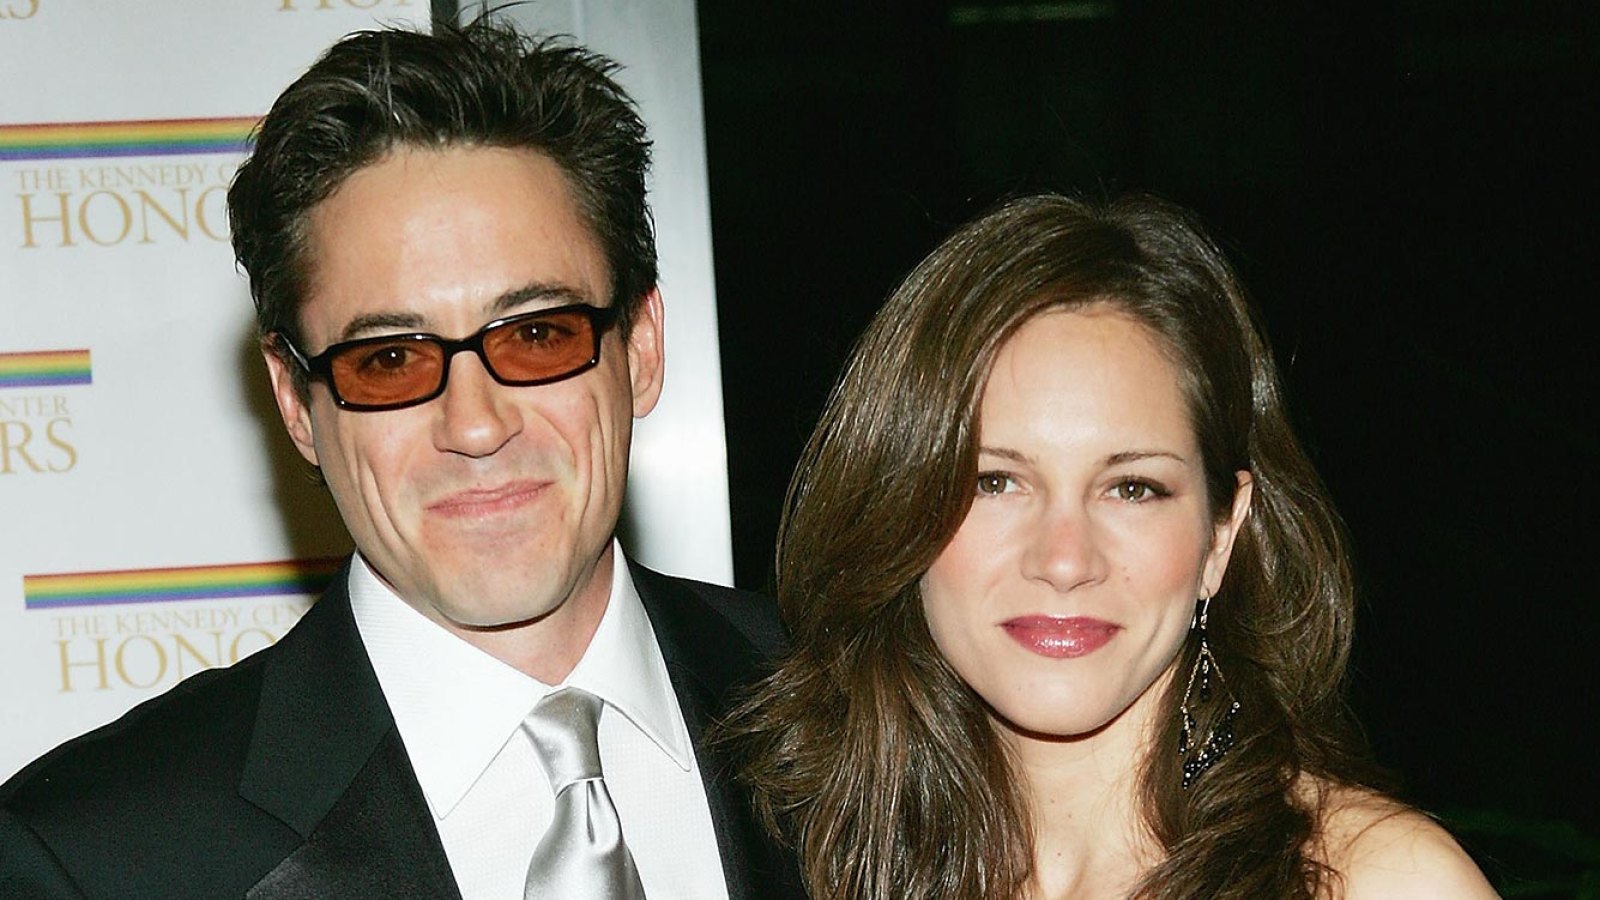 Robert Downey Jr. And Wife Susan Downey's Relationship Timeline